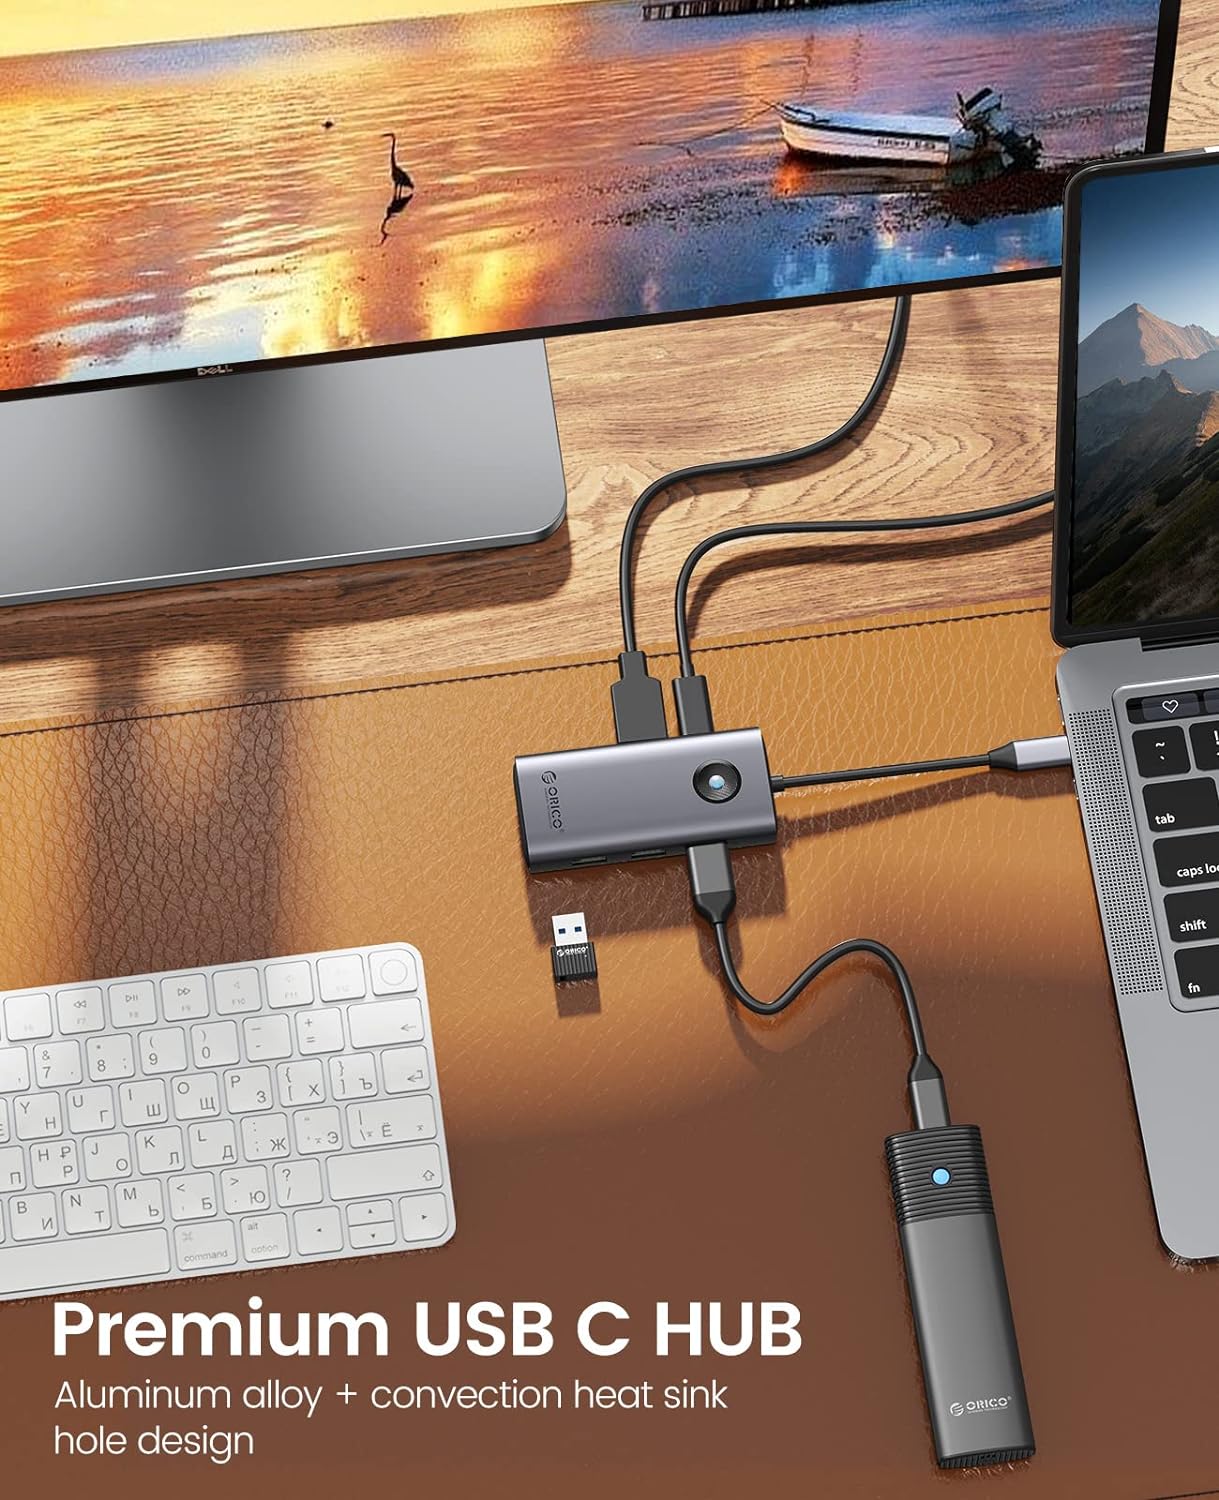 USB C Hub, ORICO 5 in 1 USB C Docking Station with 4K HDMI, 60W Power Delivery, USB 3.0 5 Gbps and 2 USB 2.0 Data Ports USB C Dock for MacBook Air, MacBook Pro, XPS, and More Type-C Devices